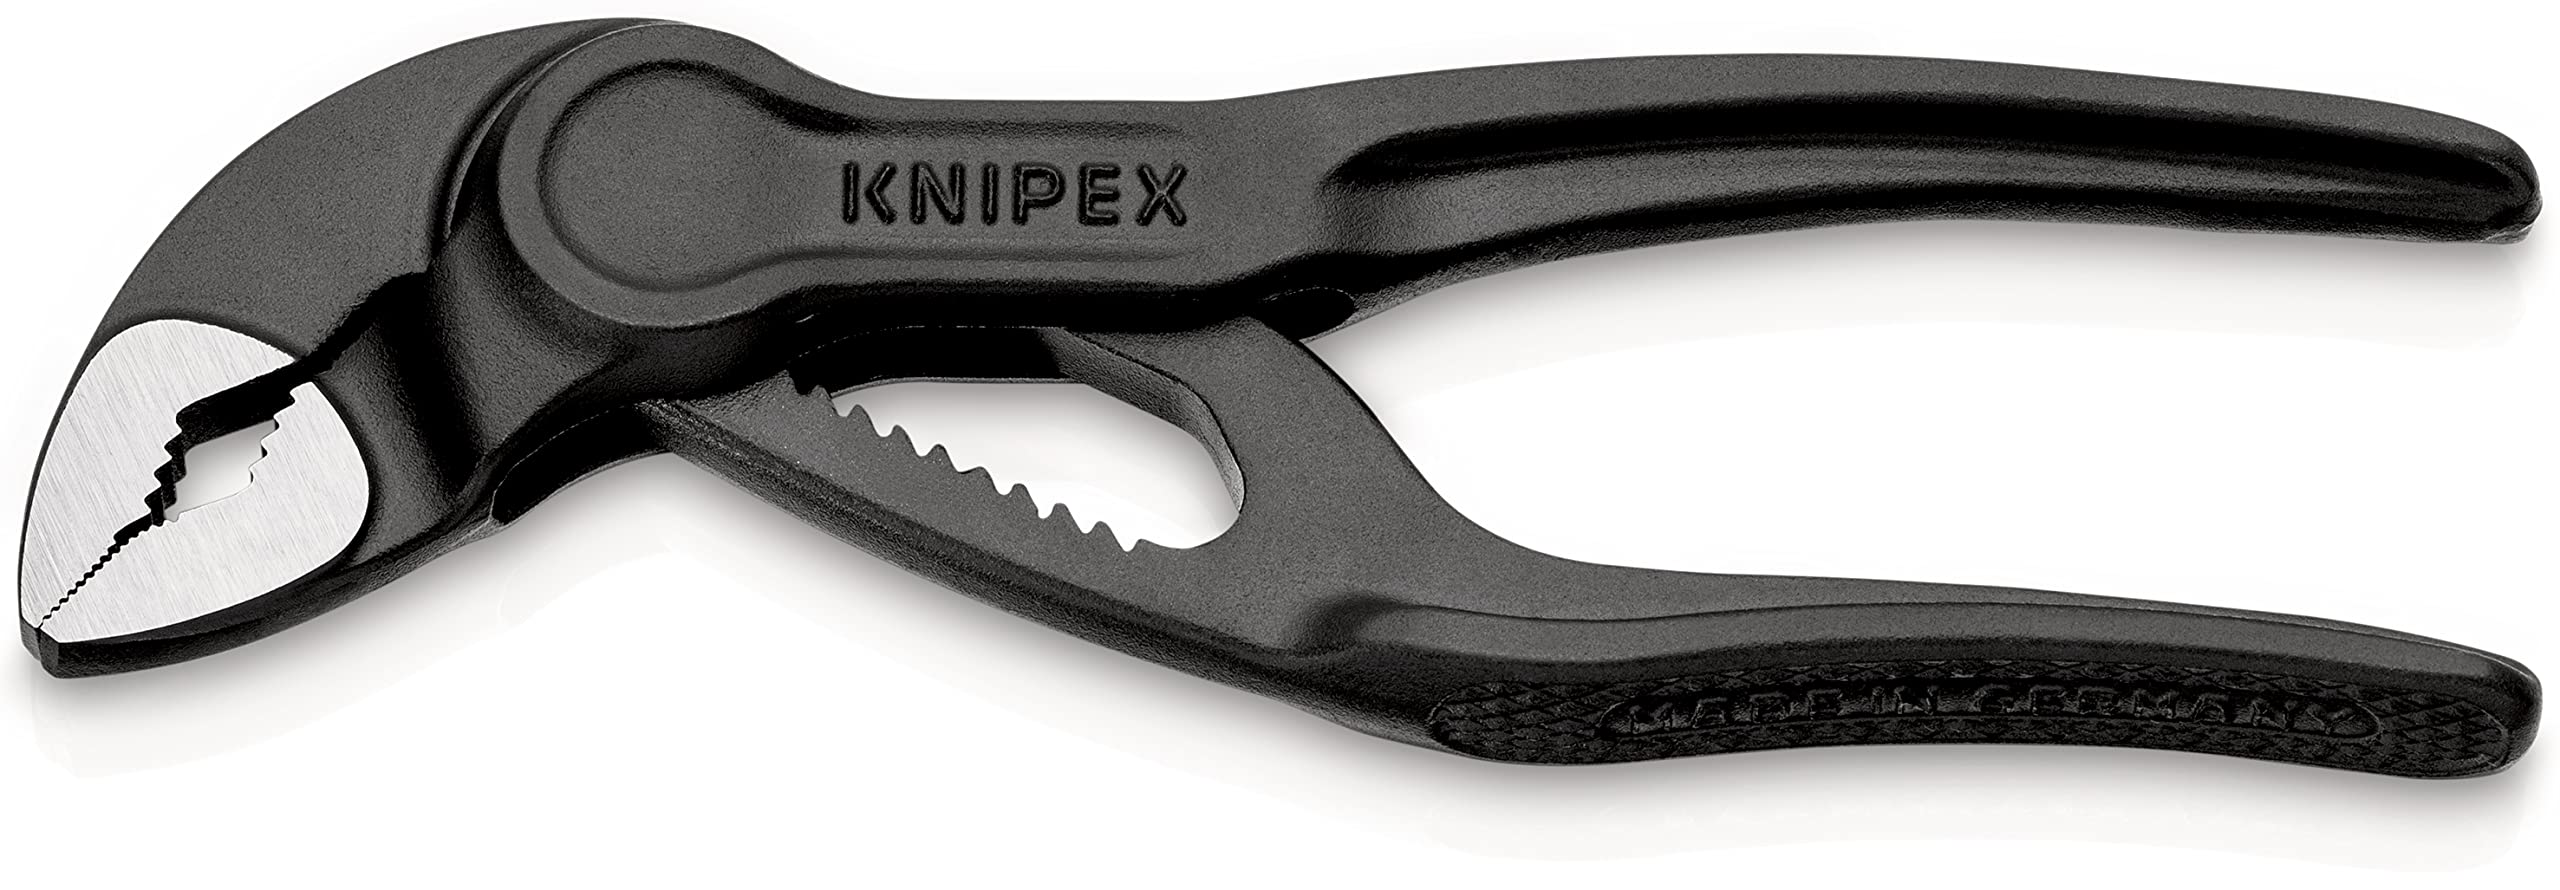 EXPIRED NOW -KNIPEX Cobra XS Pliers 87 00 100 - Amazon.con free shipping ships from UK - $26.33